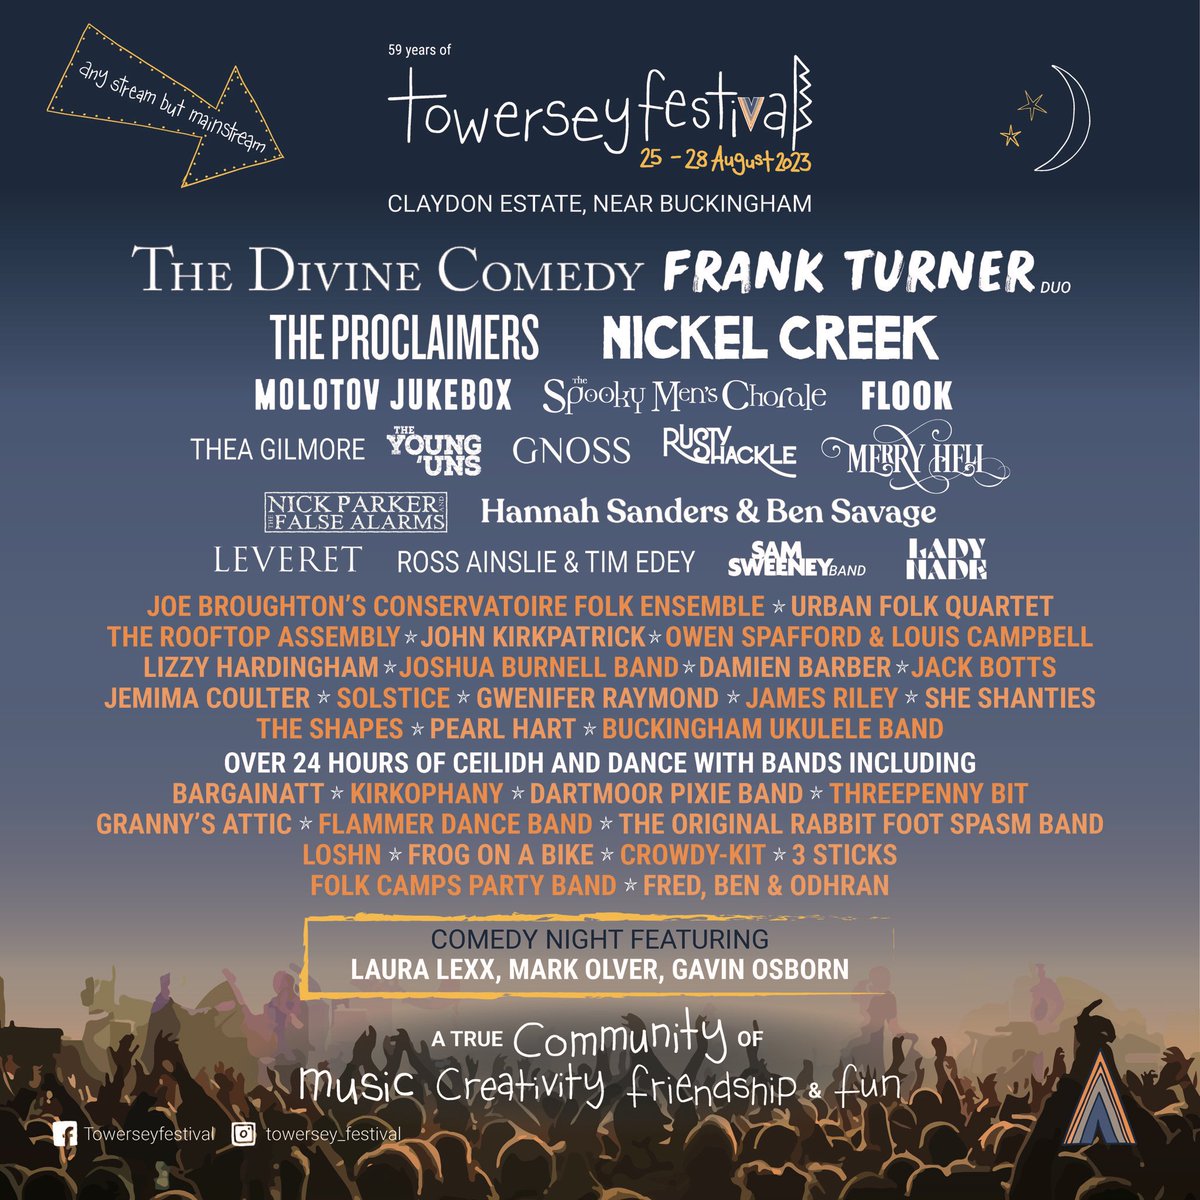 Next band gig is this beauty @towerseyfesti with a whole host of very fine acts. Day and weekend tickets still available. We’re on the Saturday with @frankturner @LadyNade @theagilmore and Flook among others.